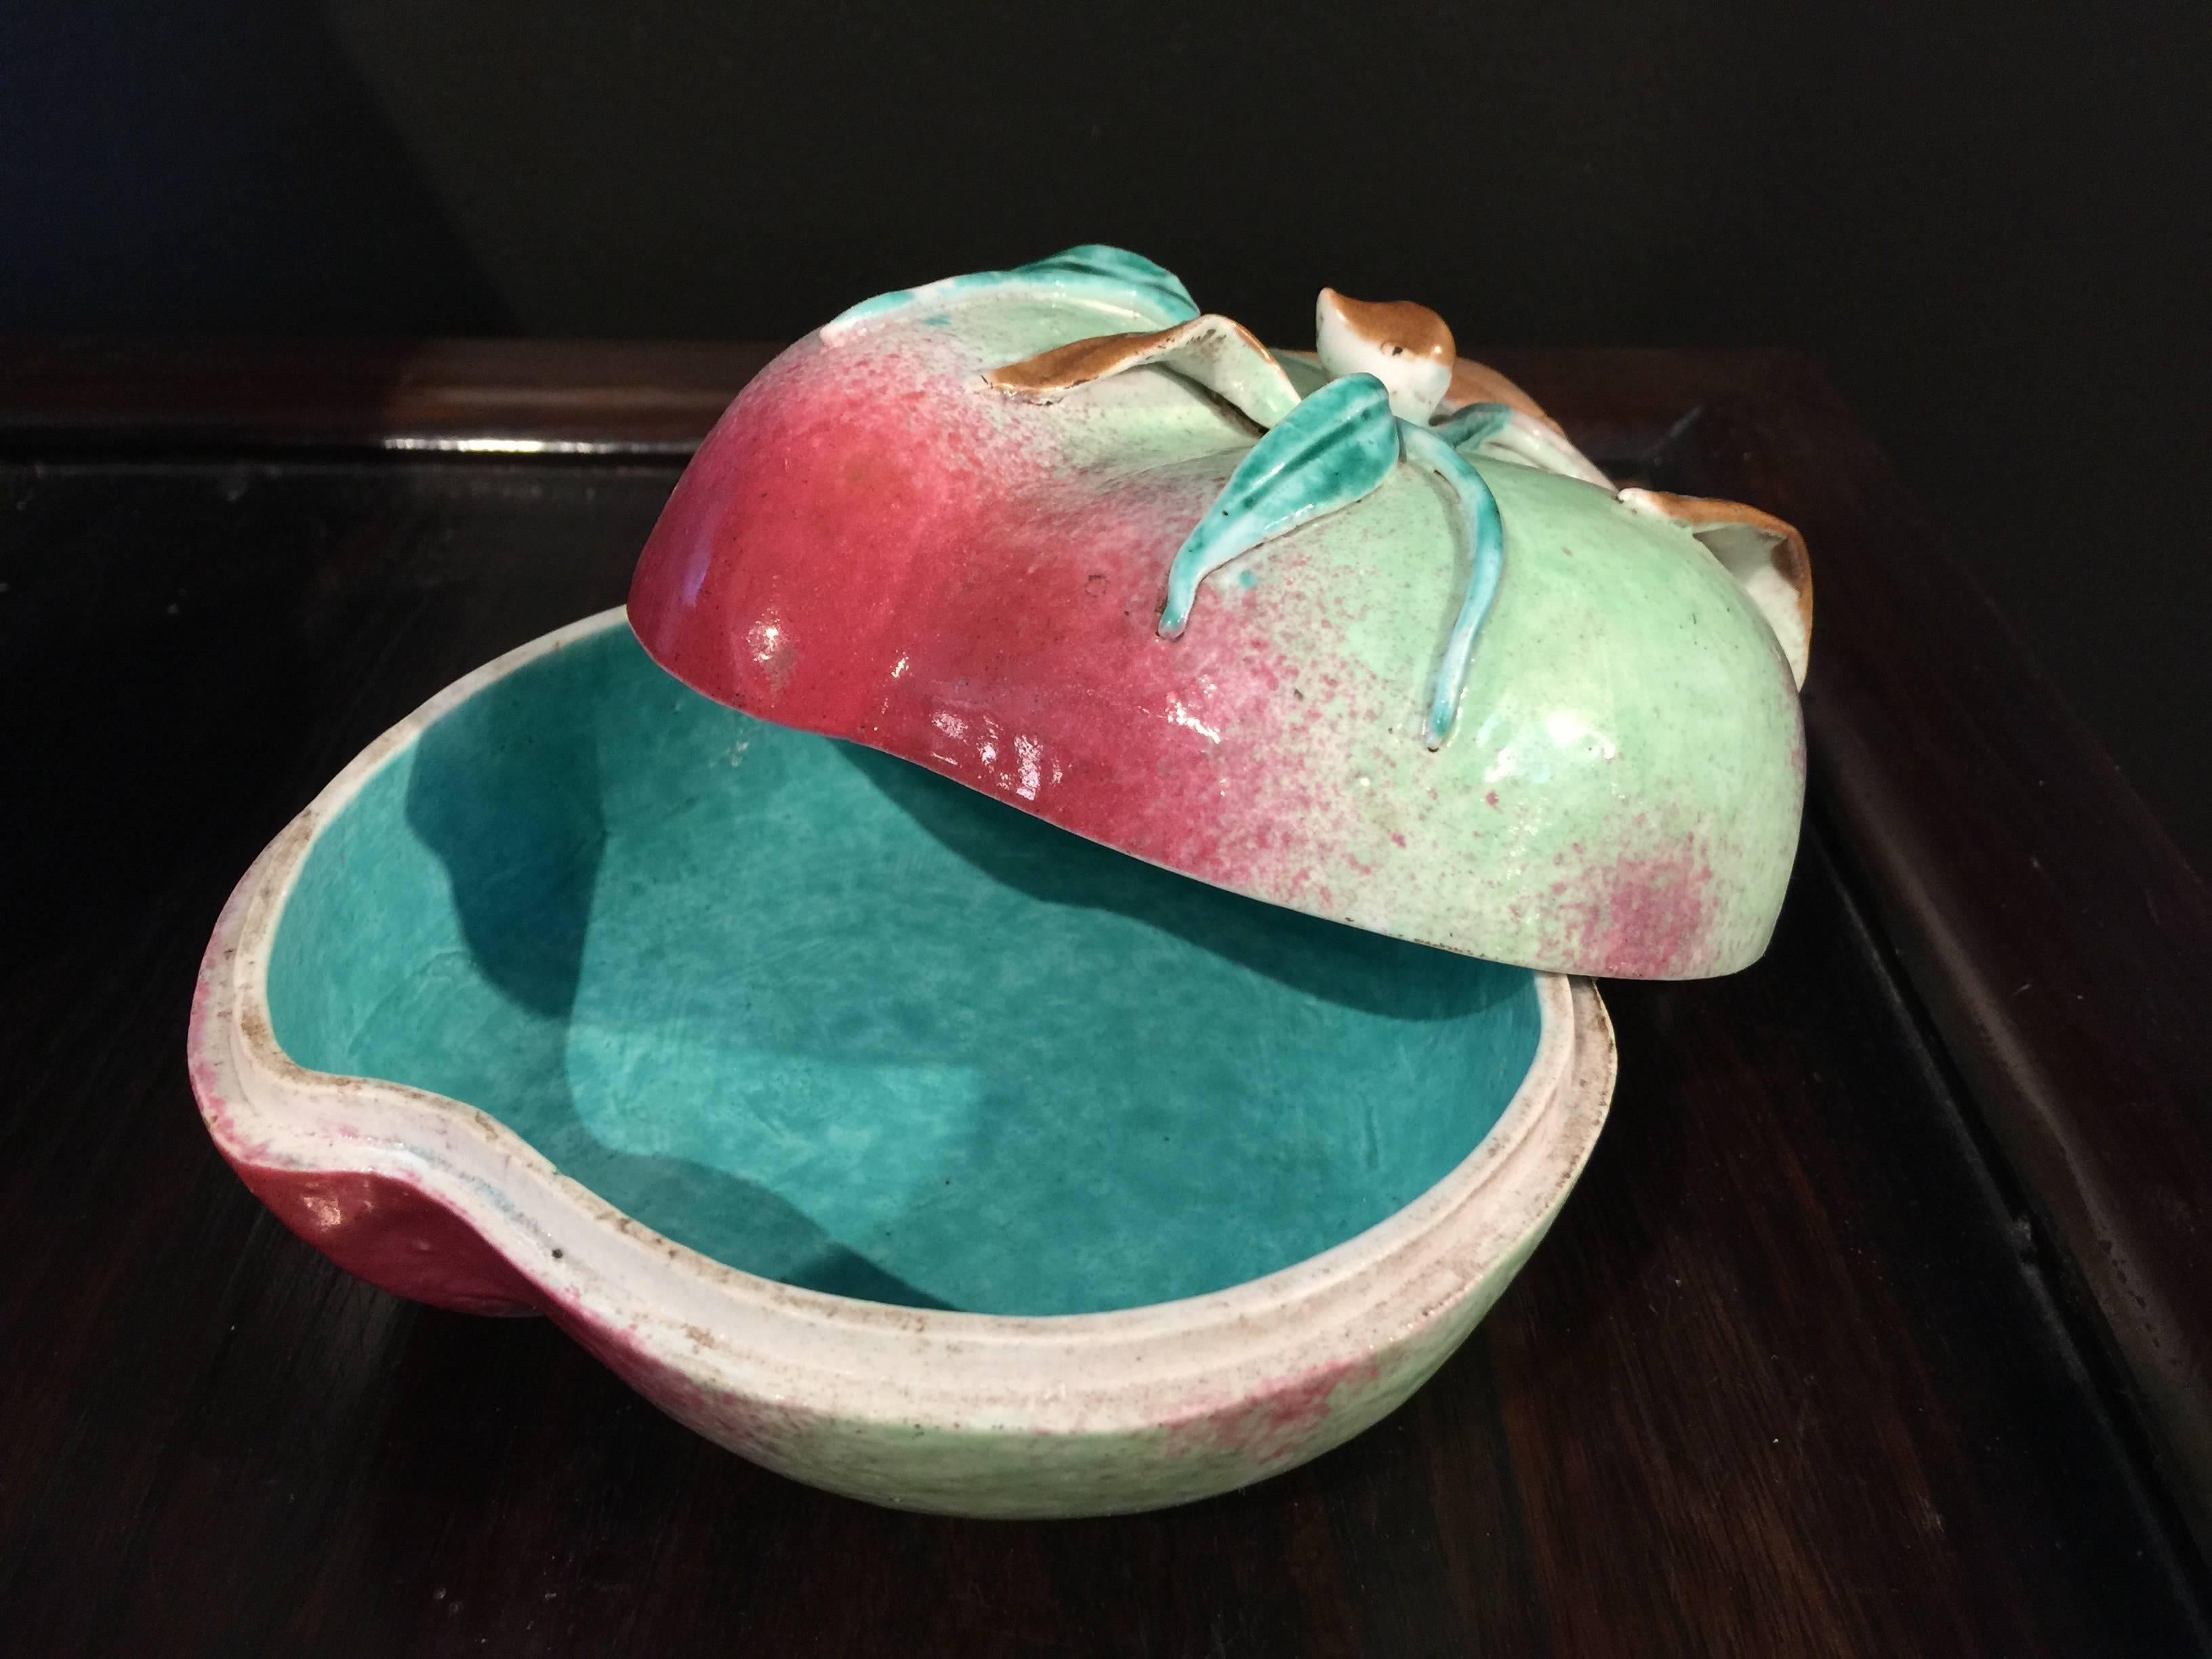 A beautiful late 19th century-early 20th century Chinese famille rose peach form box with turquoise color interior.